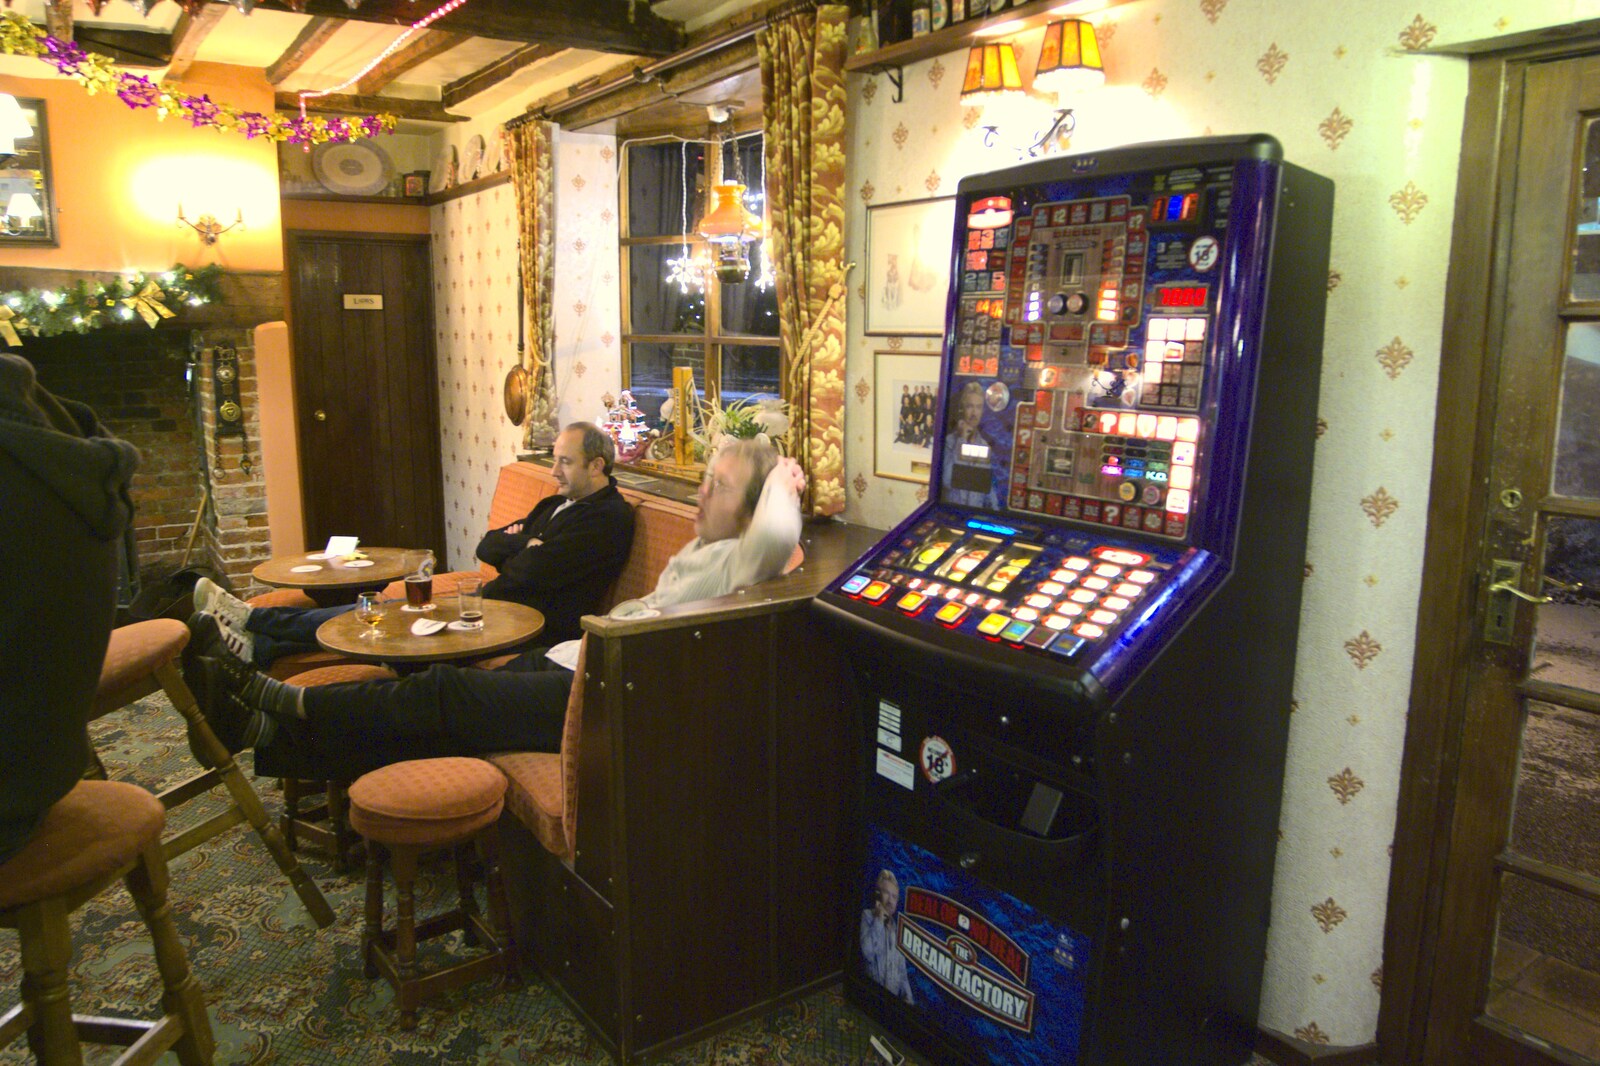 DH and Marc near the fruit machine from New Year's Eve at the Swan Inn, and Moonlight Photos, Brome, Suffolk - 31st December 2009